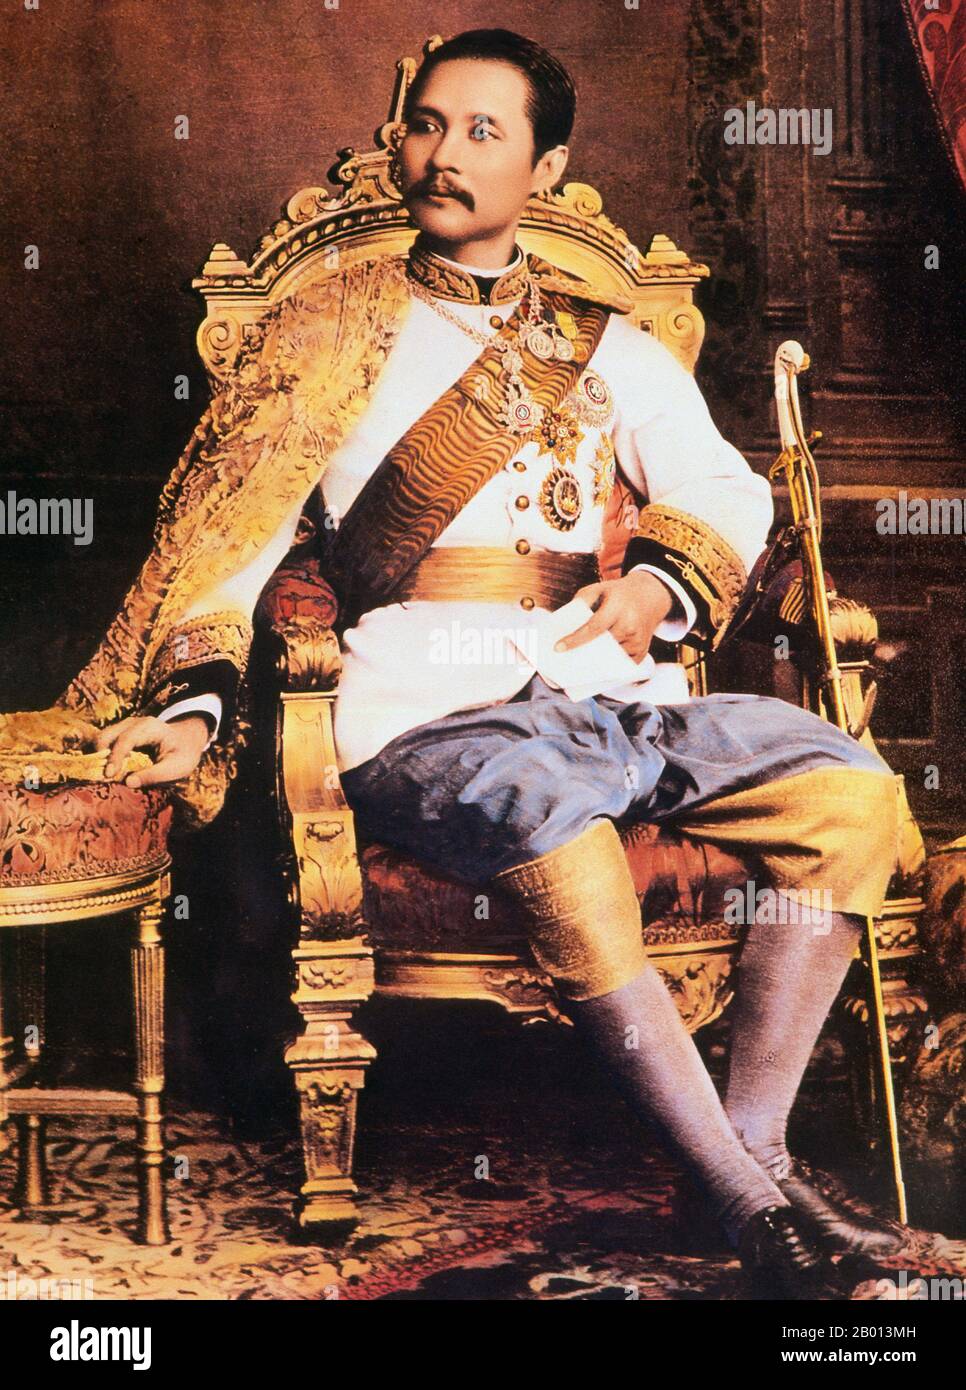 Thailand: King Rama V, Chulalongkorn (20 September 1853 – 23 October 1910), 5th monarch of the Chakri Dynasty, late 19th - early 20th century.  Phra Bat Somdet Phra Poramintharamaha Chulalongkorn Phra Chunla Chom Klao Chao Yu Hua, or Rama V was the fifth monarch of Siam under the House of Chakri. He is considered one of the greatest kings of Siam. His reign was characterised by the modernisation of Siam, immense government and social reforms, and territorial cessions to the British Empire and French Indochina, saving Siam from being colonised. Stock Photo